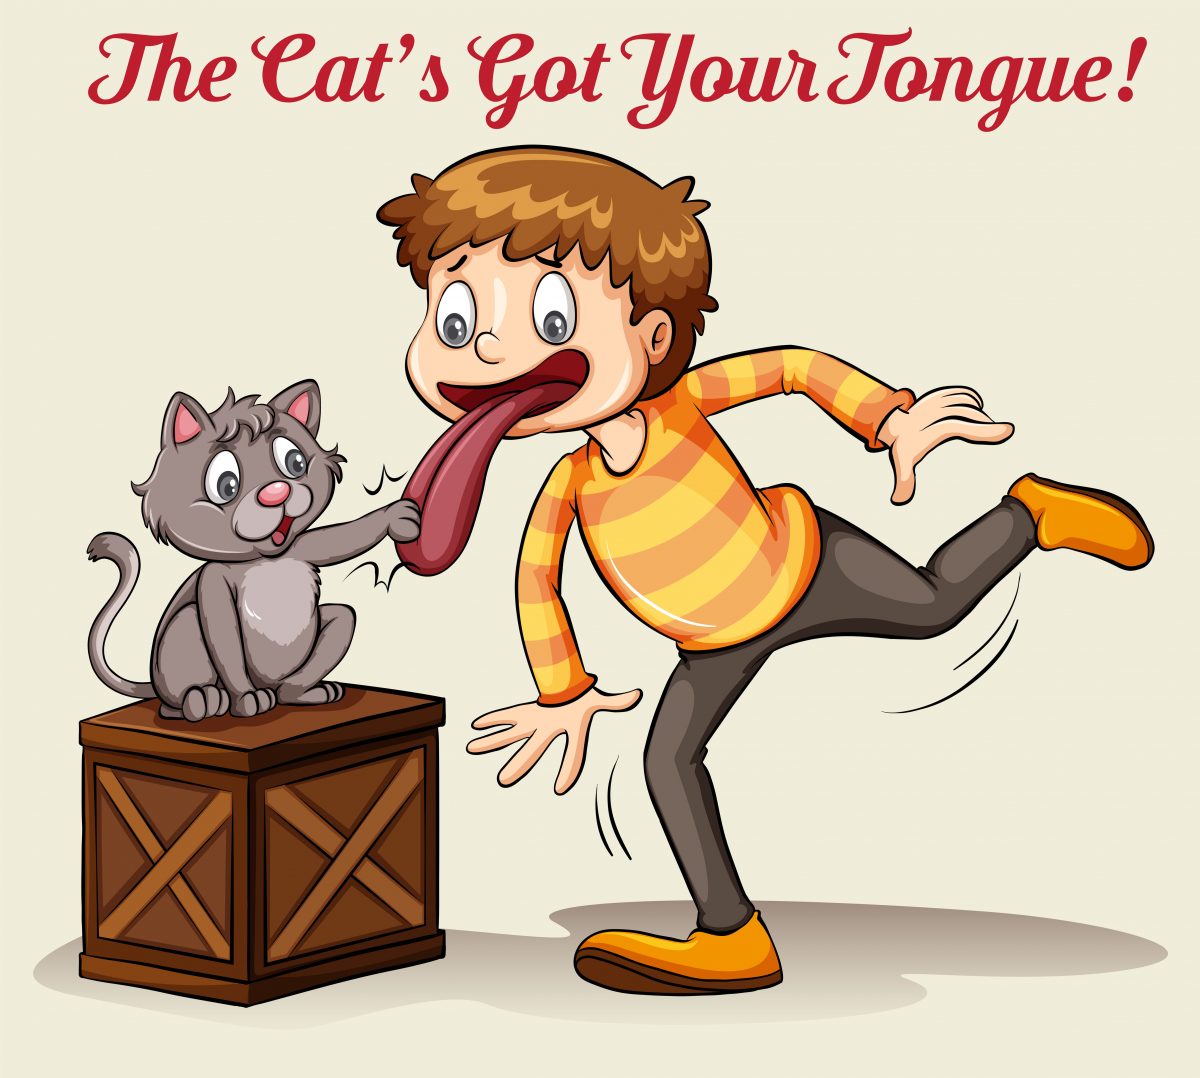 The cat´s got your tongue